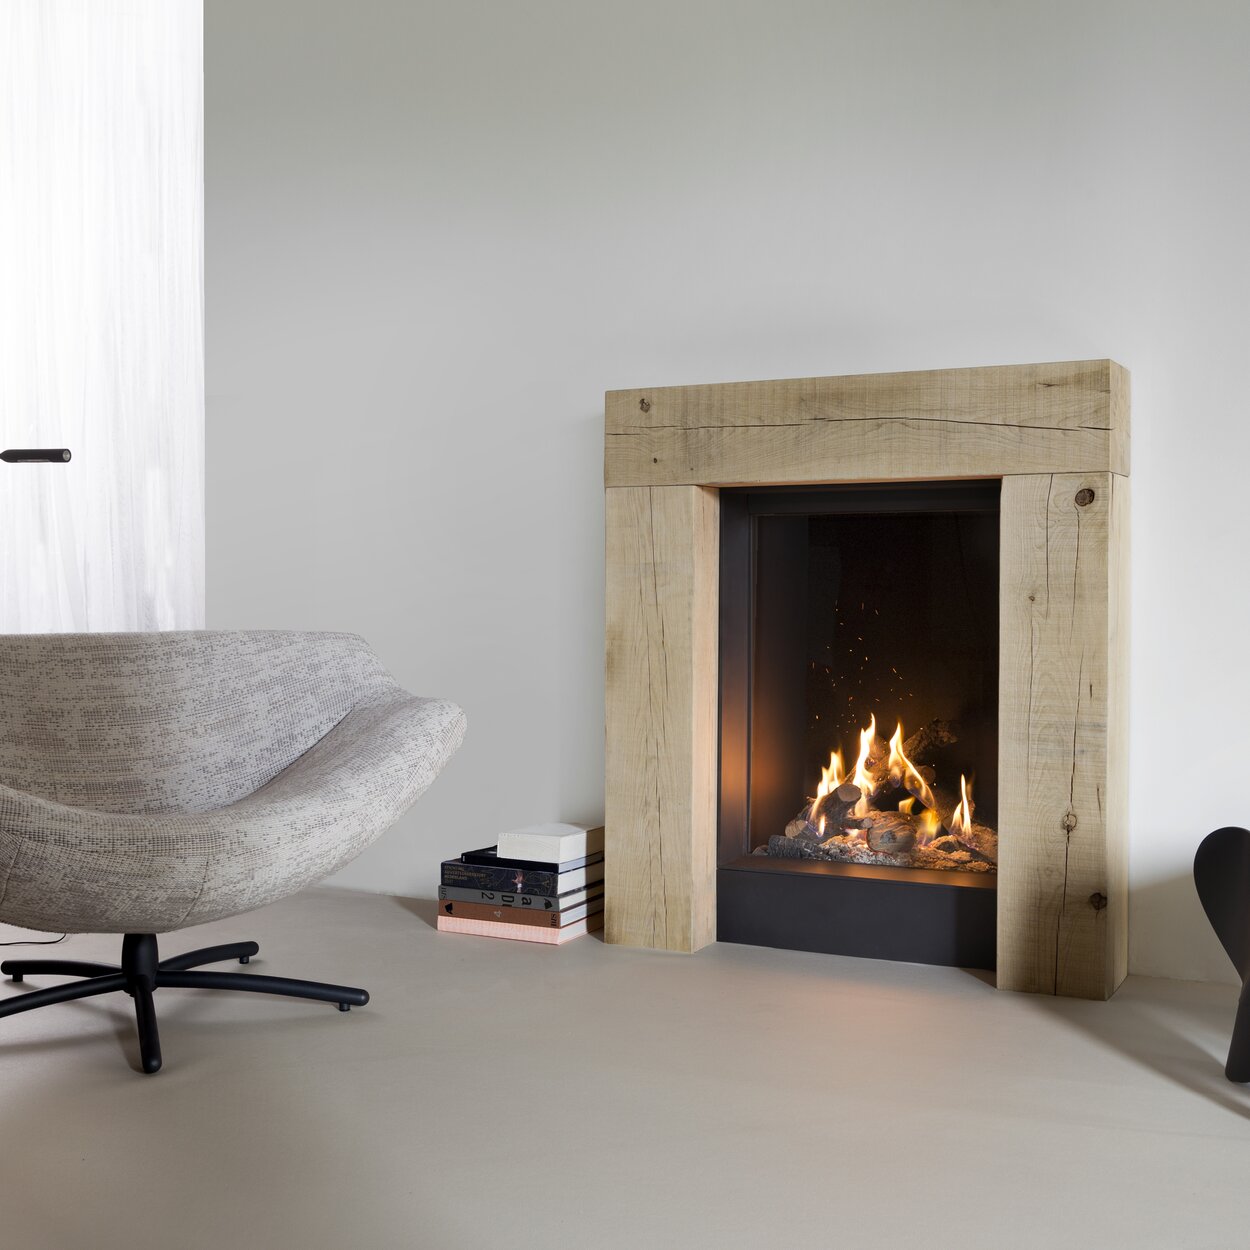 Front version gas fireplace GP60/79F with wooden frame built into white wall in living room with armchair